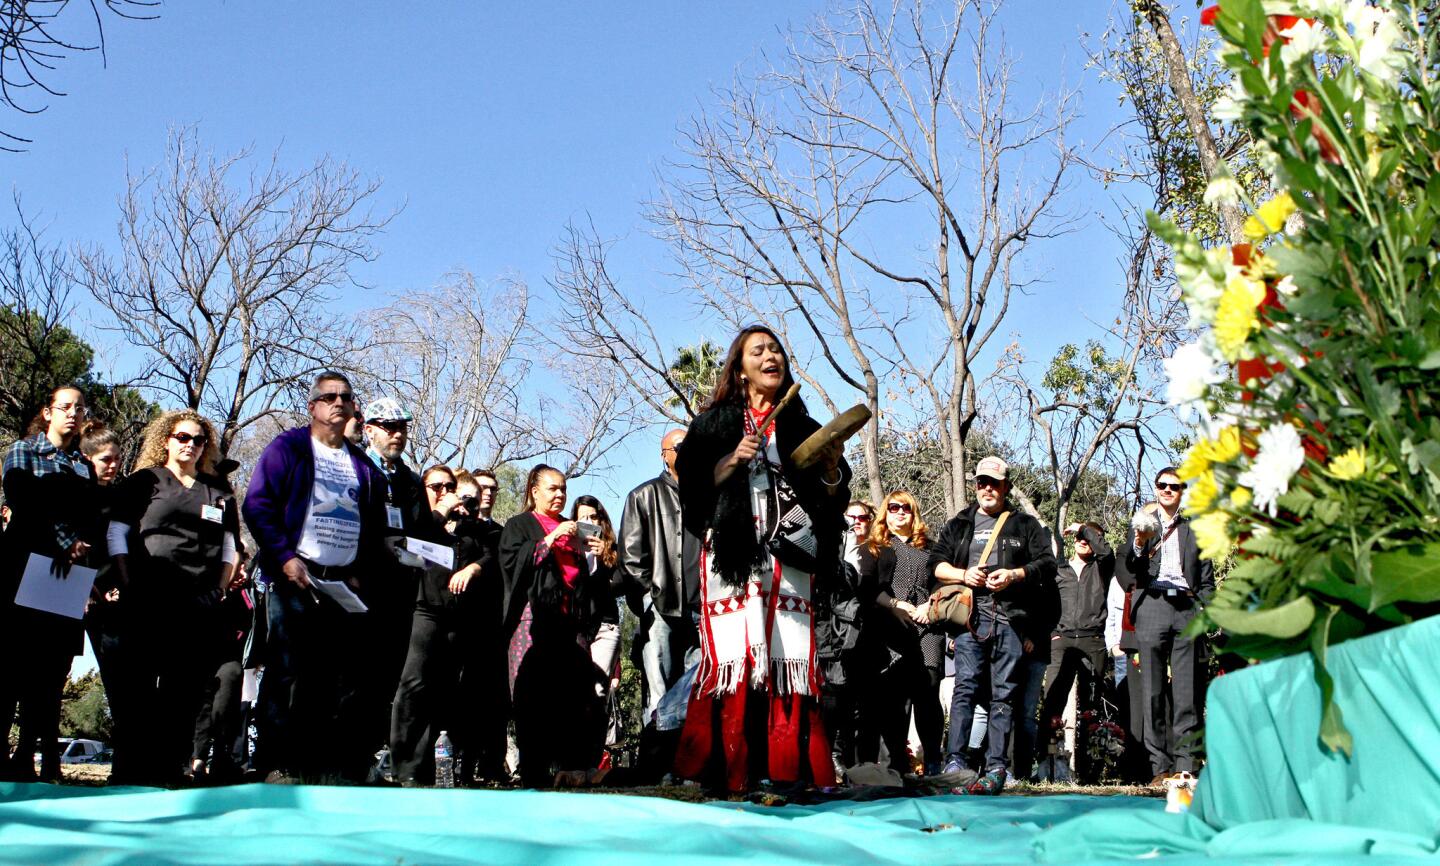 Raquel Salinas performs a Native American song after doing a Native American sage blessing during the annual Los Angeles County Burial of the Unclaimed Dead interfaith ceremony at the L.A. County Cemetery in Boyle Heights on Wednesday, November 30, 2016. The cremains of 1,430 individuals who died and were cremated in 2013 were buried in a single mass grave a few days before. There is a 3-year wait between death and burial to allow family members to come forward to claim the cremated remains before burial. L.A. County has been conducting burials for the unclaimed dead since 1896.